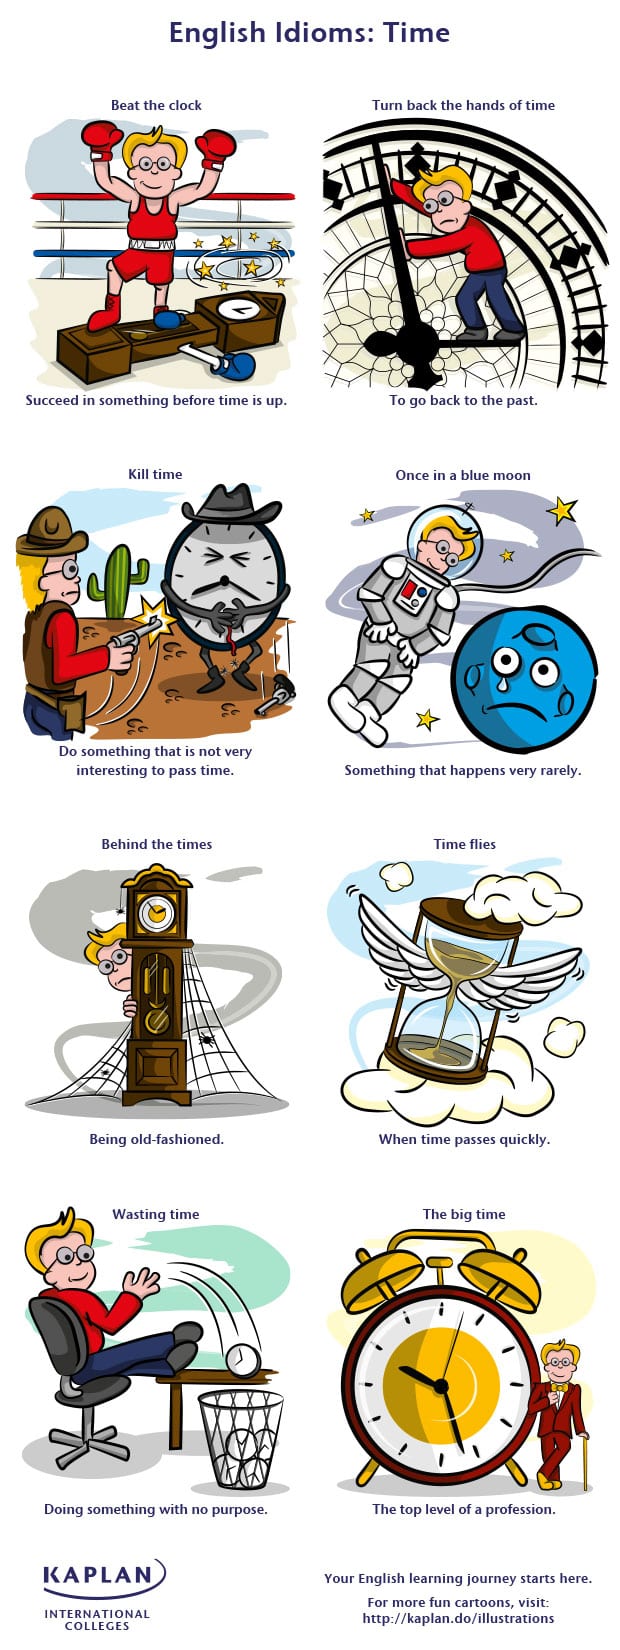 idioms list for kids